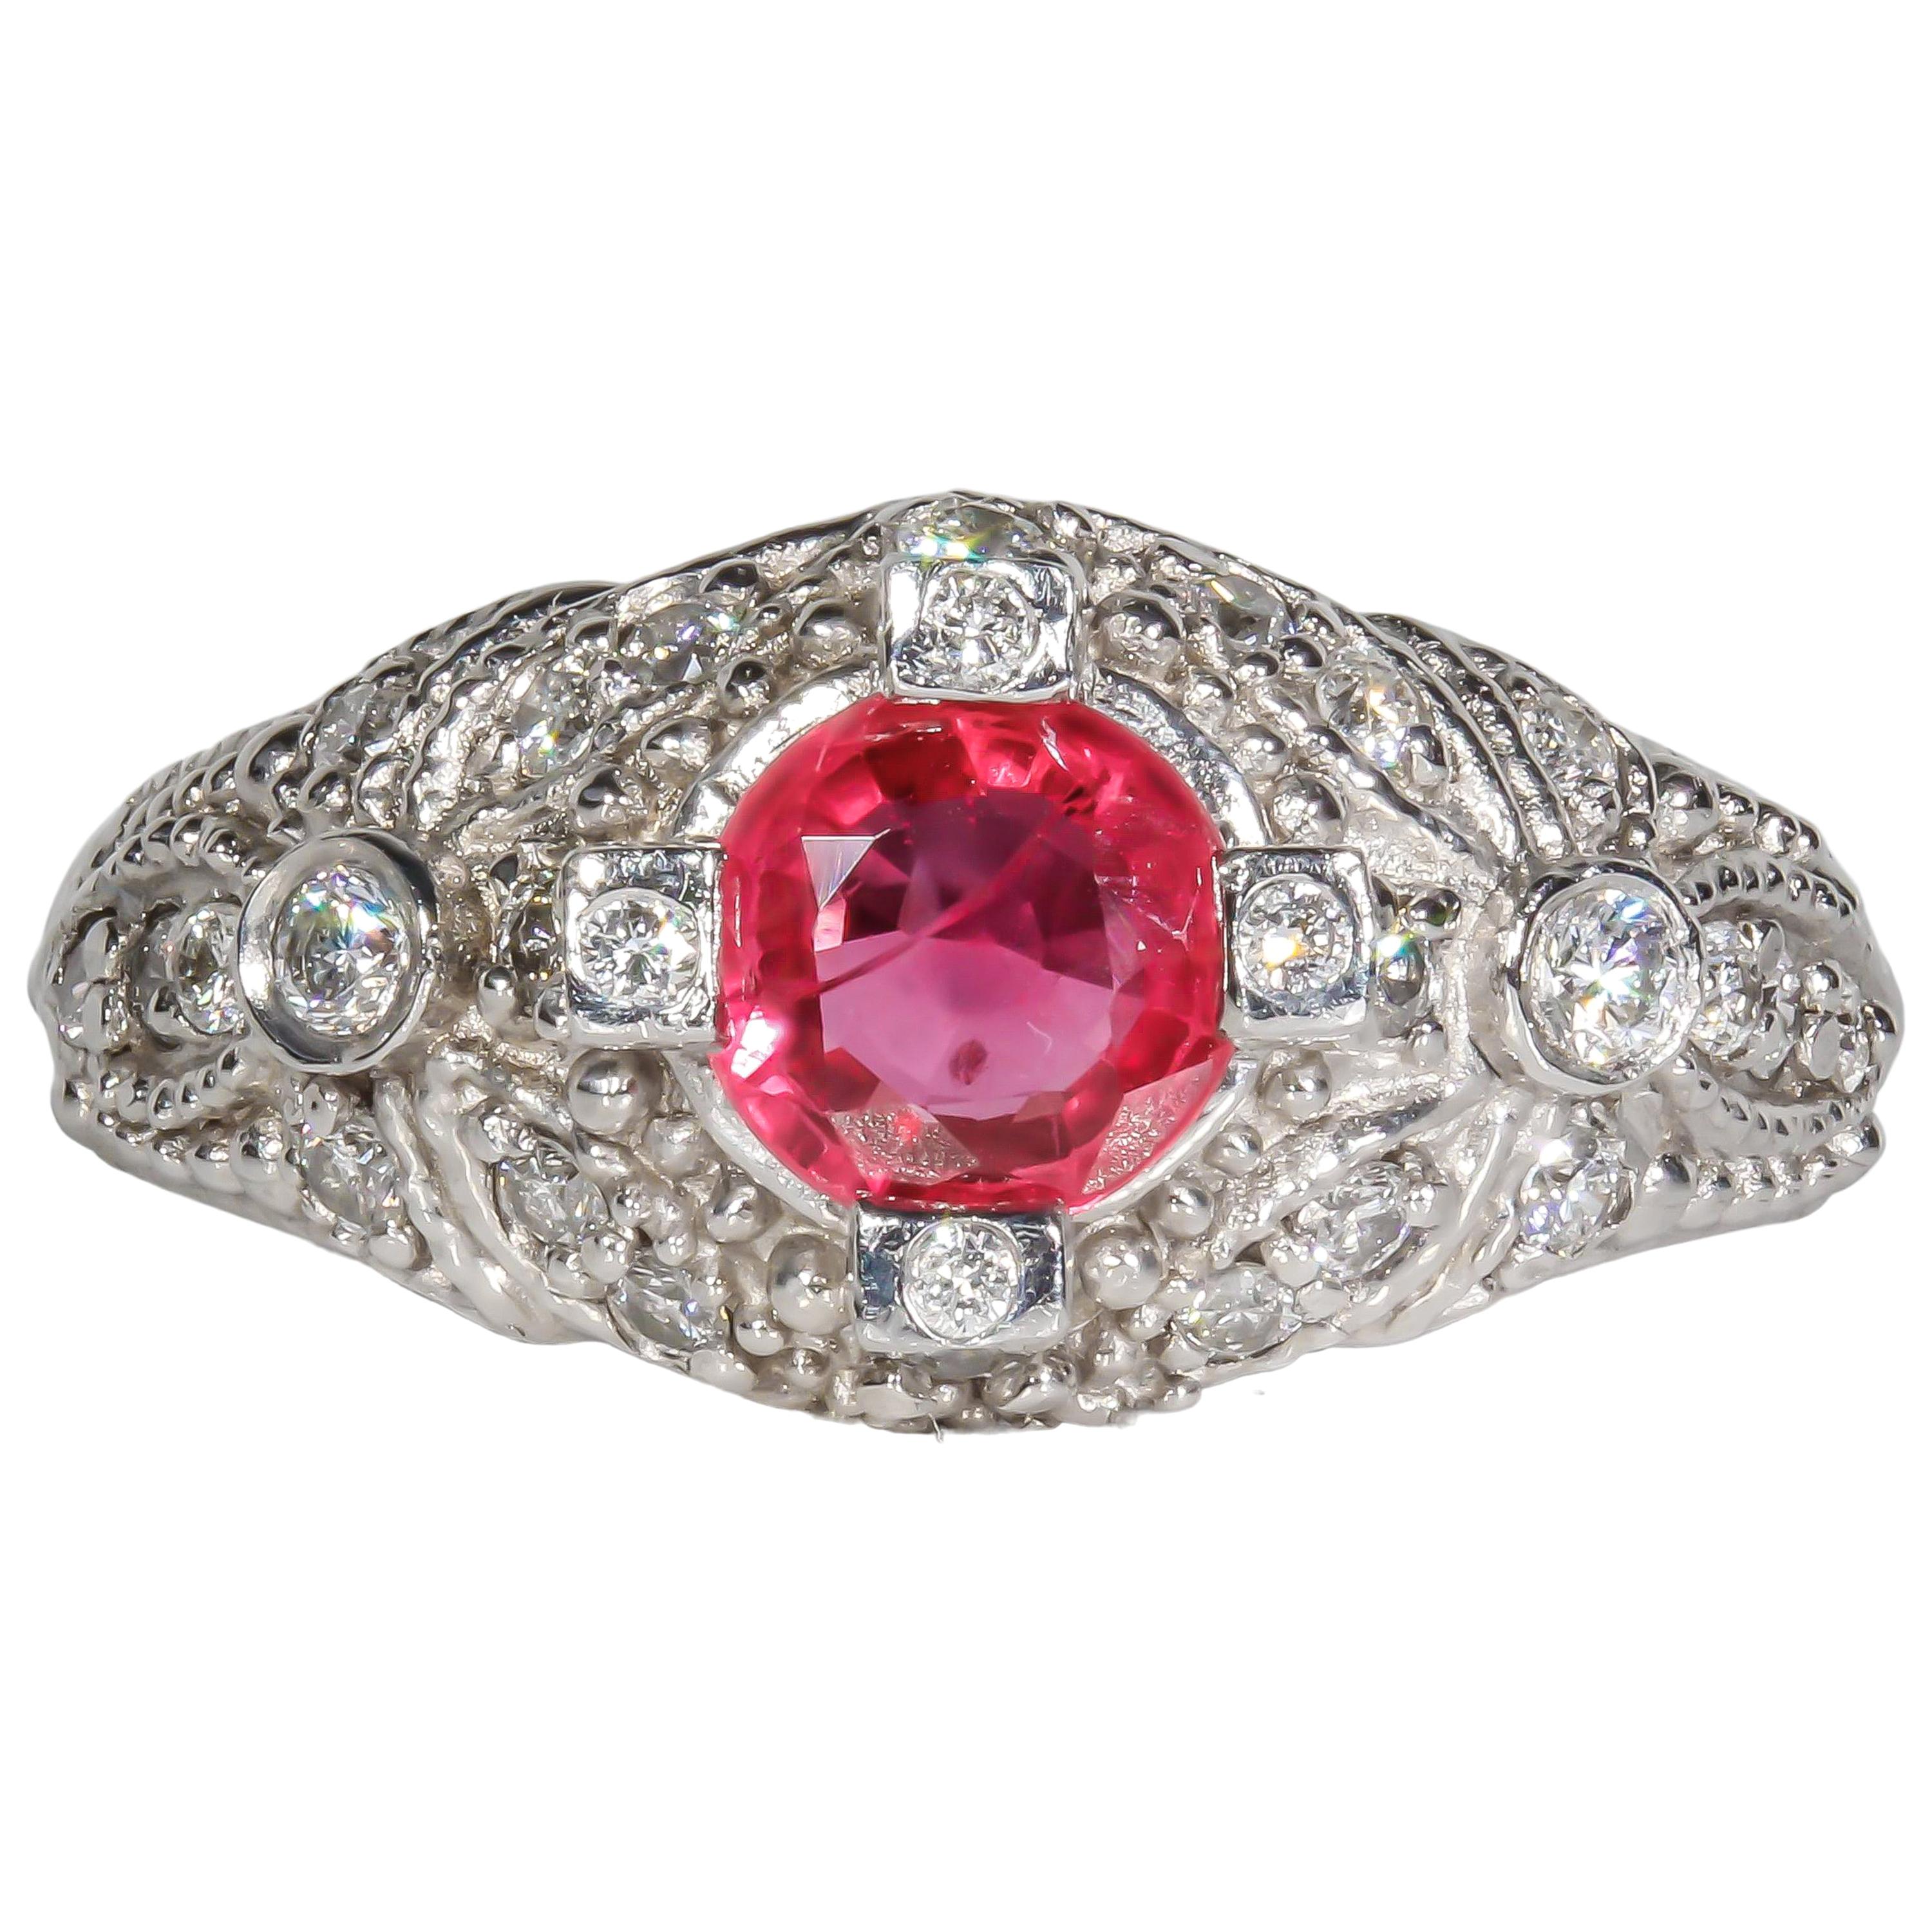 1.06 Carat Ruby and Diamond Cocktail Ring